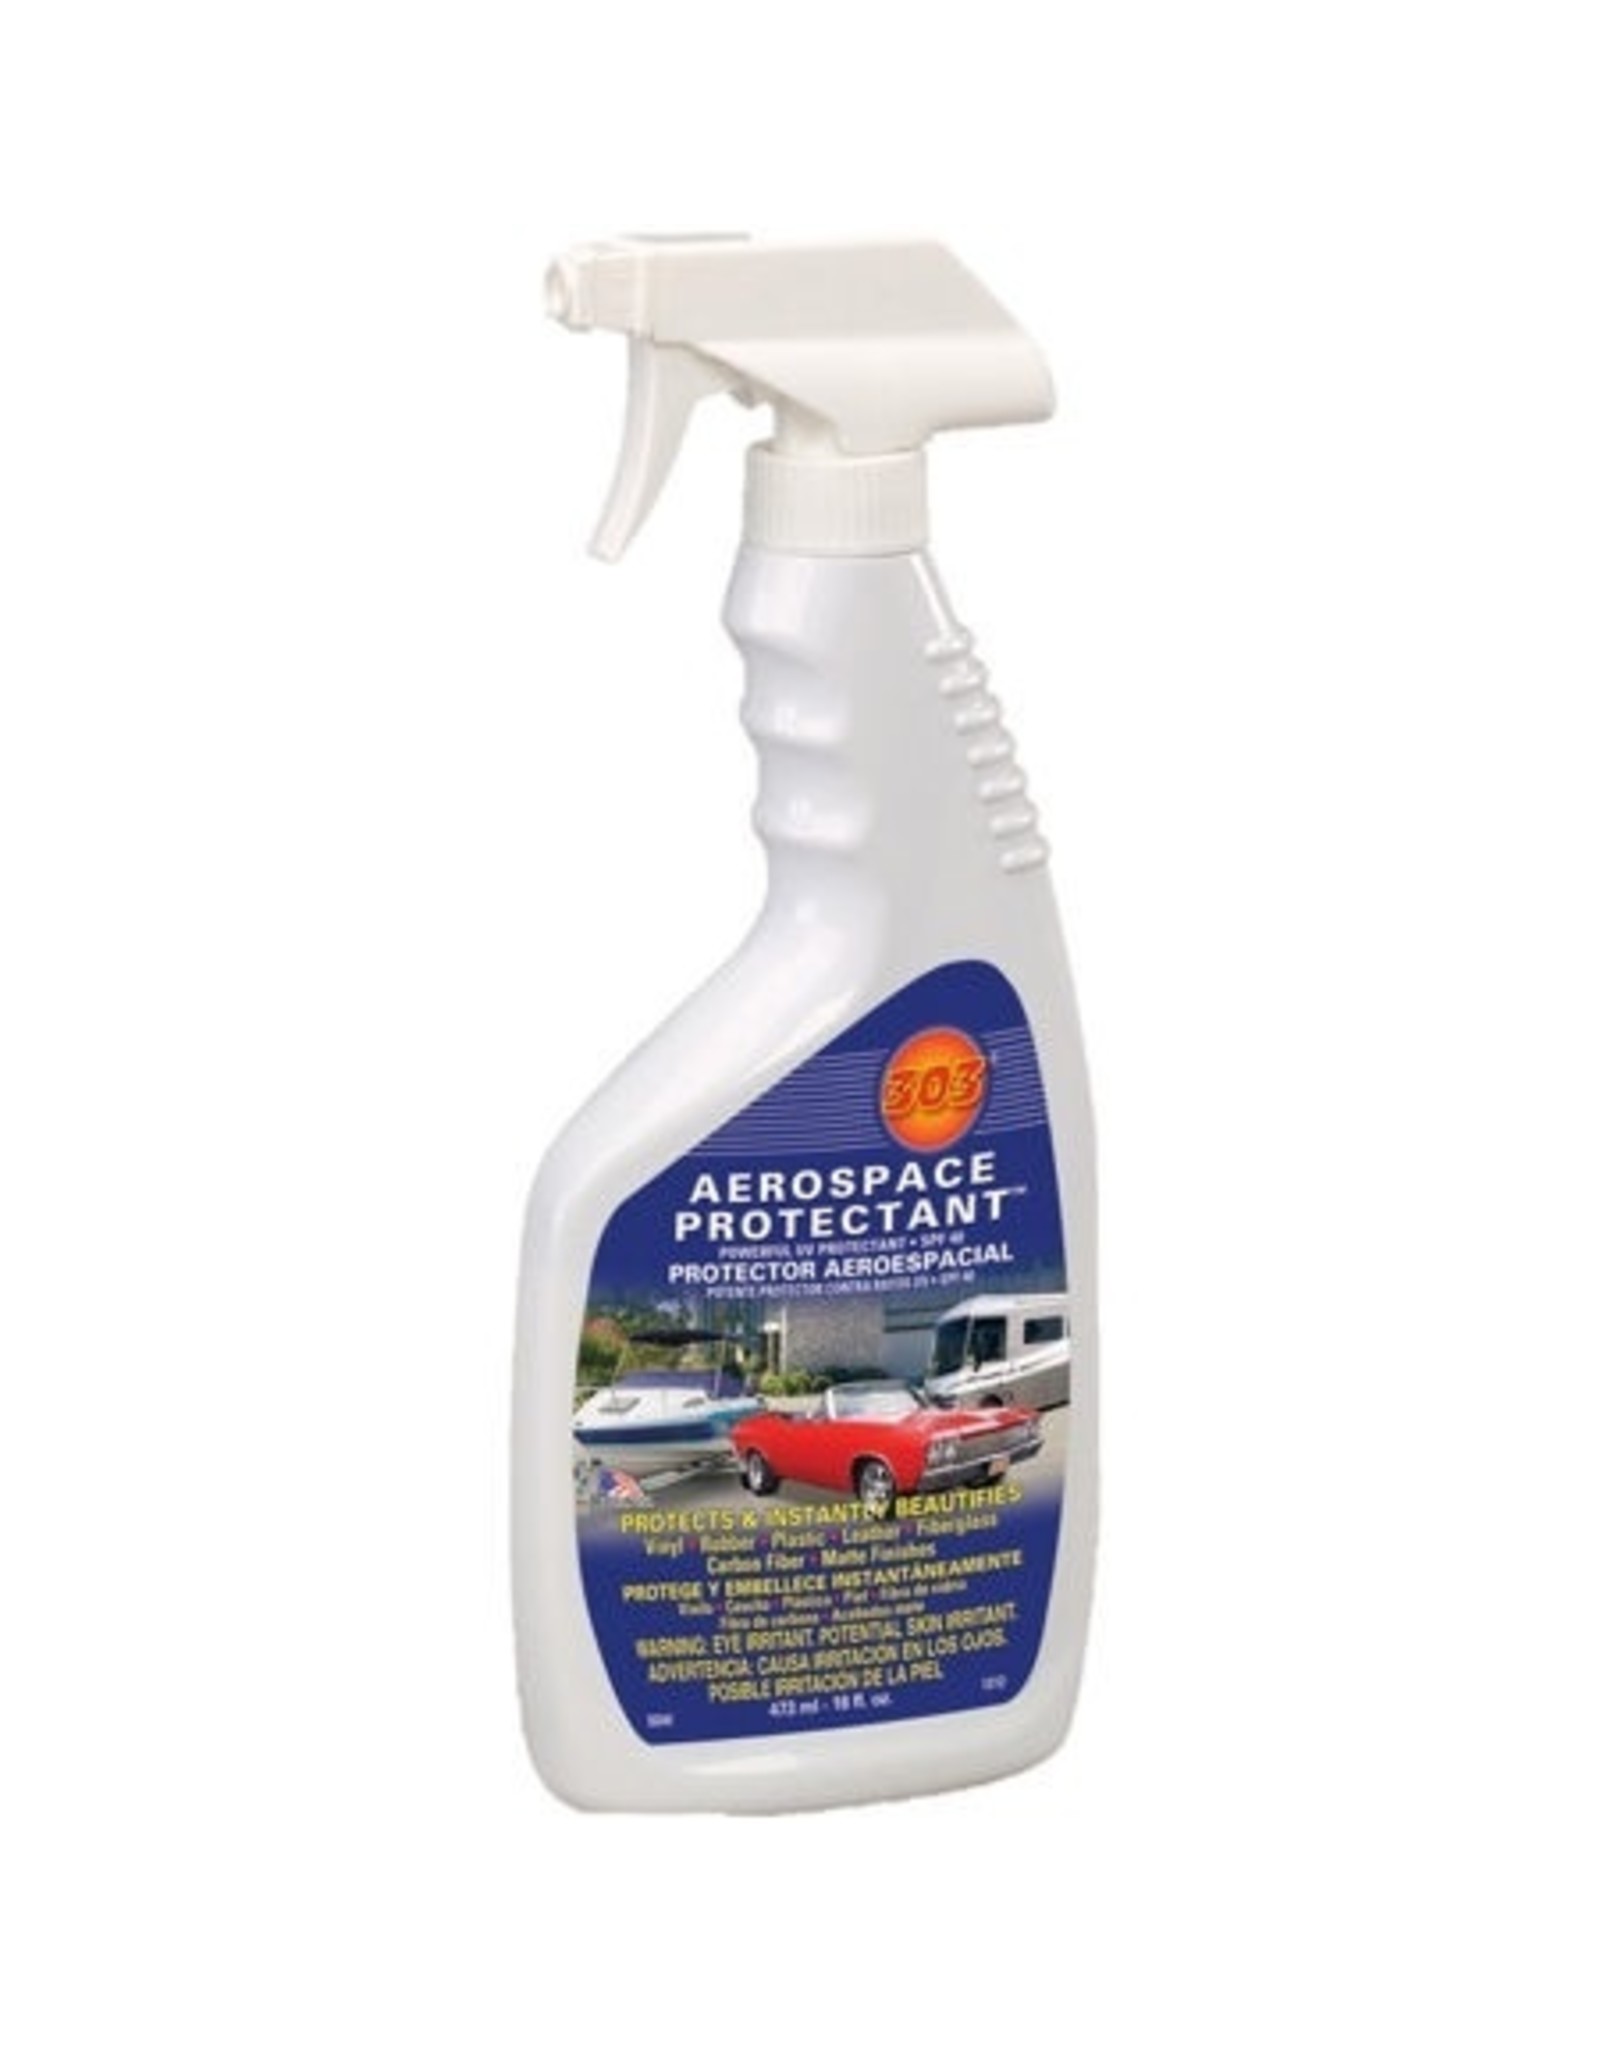 303 Aerospace Protectant - Watercraft Superstore